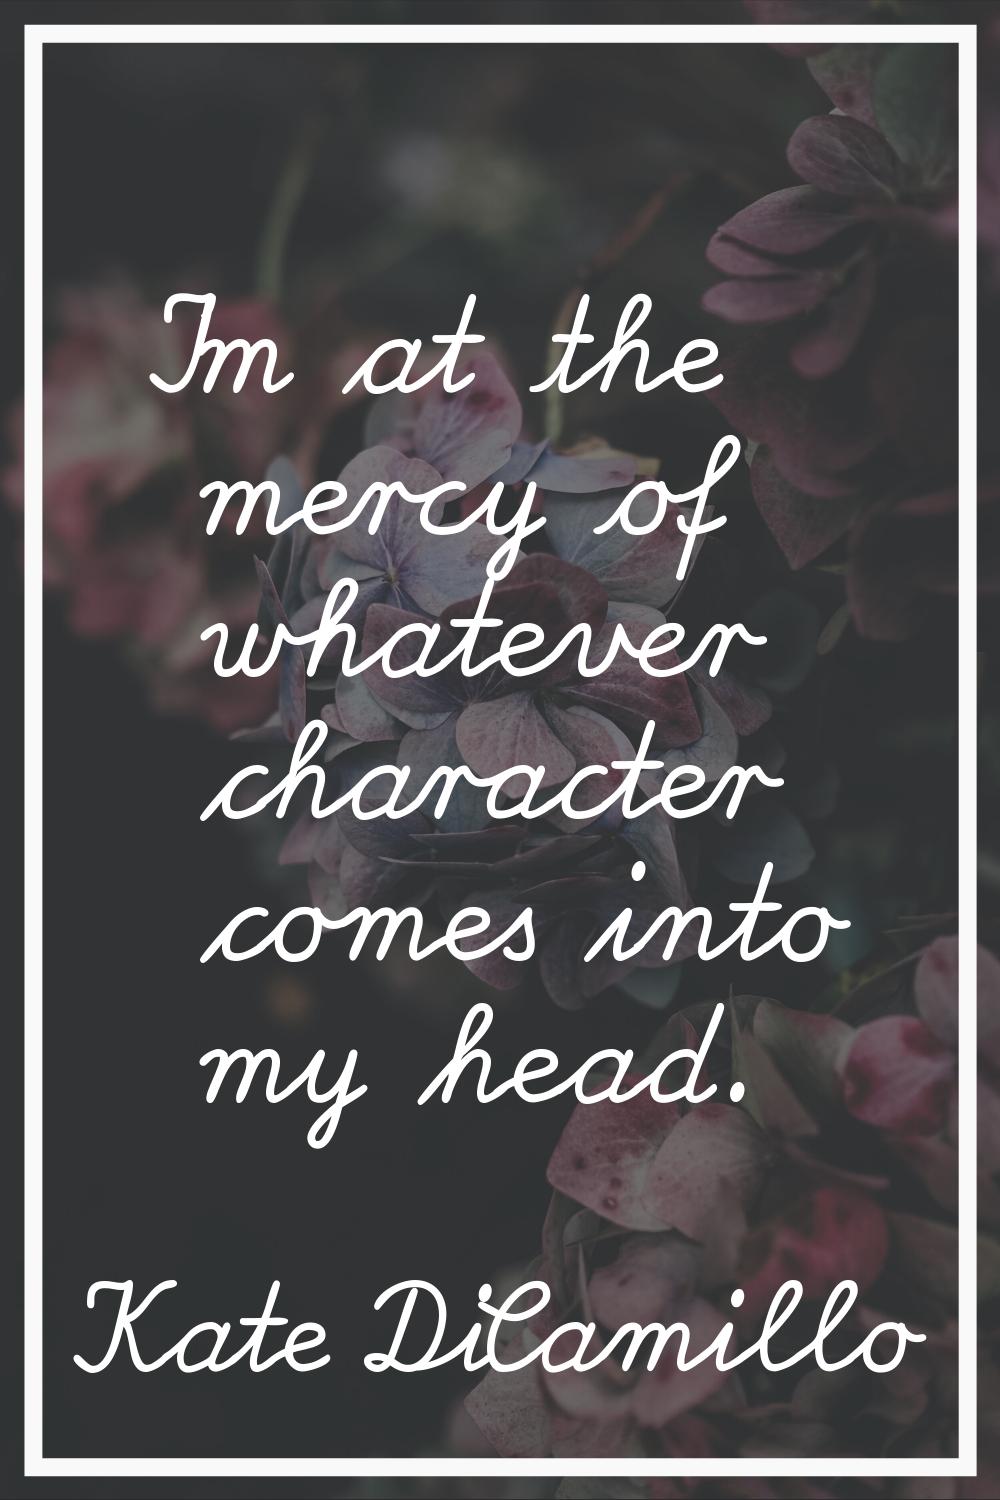 I'm at the mercy of whatever character comes into my head.